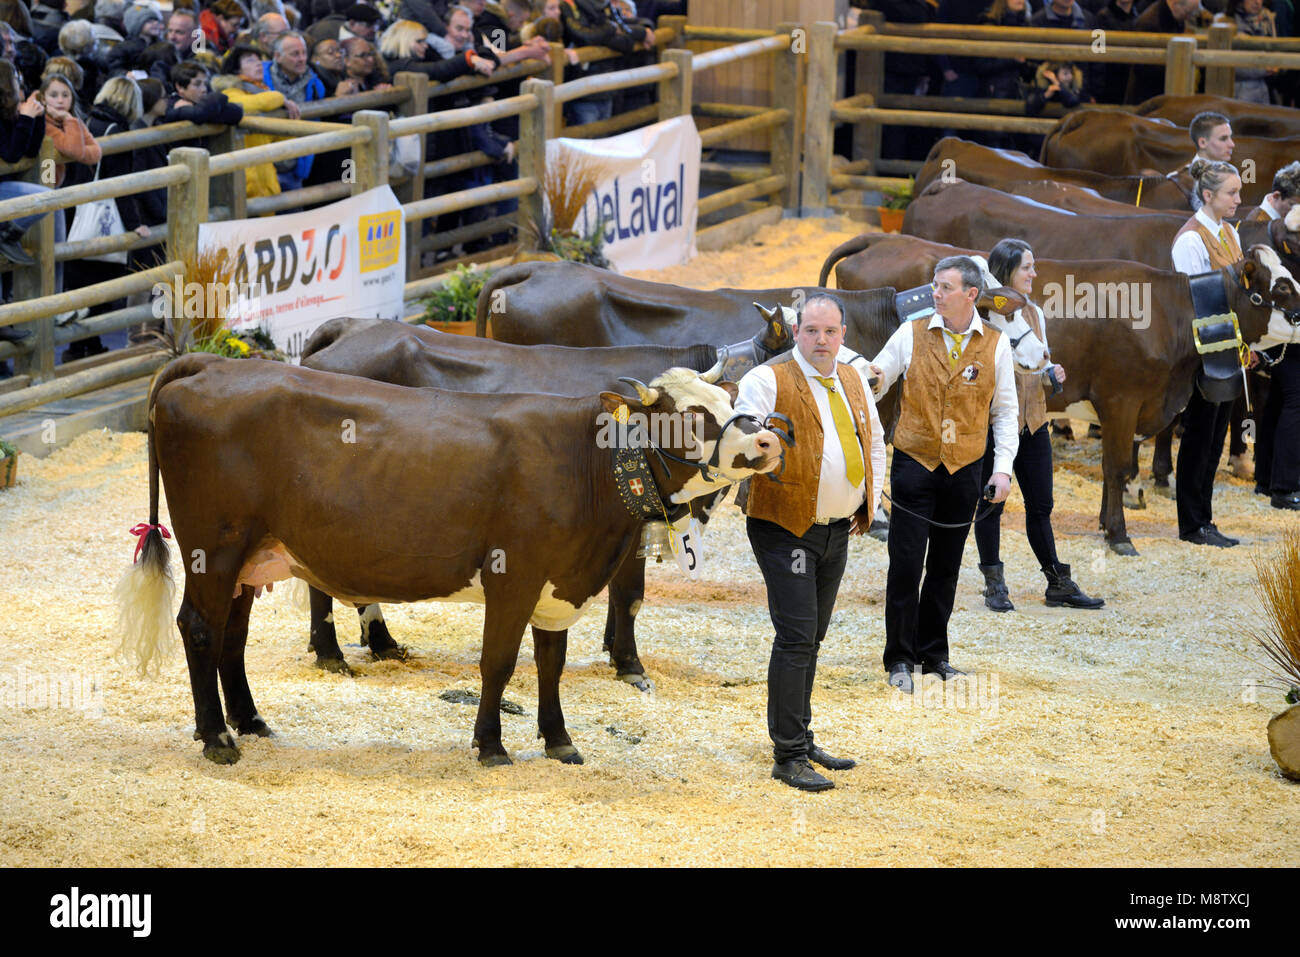 Cattle Breeders Exhibiting their Prize Cows or Cattle at the Paris International Agricultural Show or Salon International de l'Agriculture Stock Photo